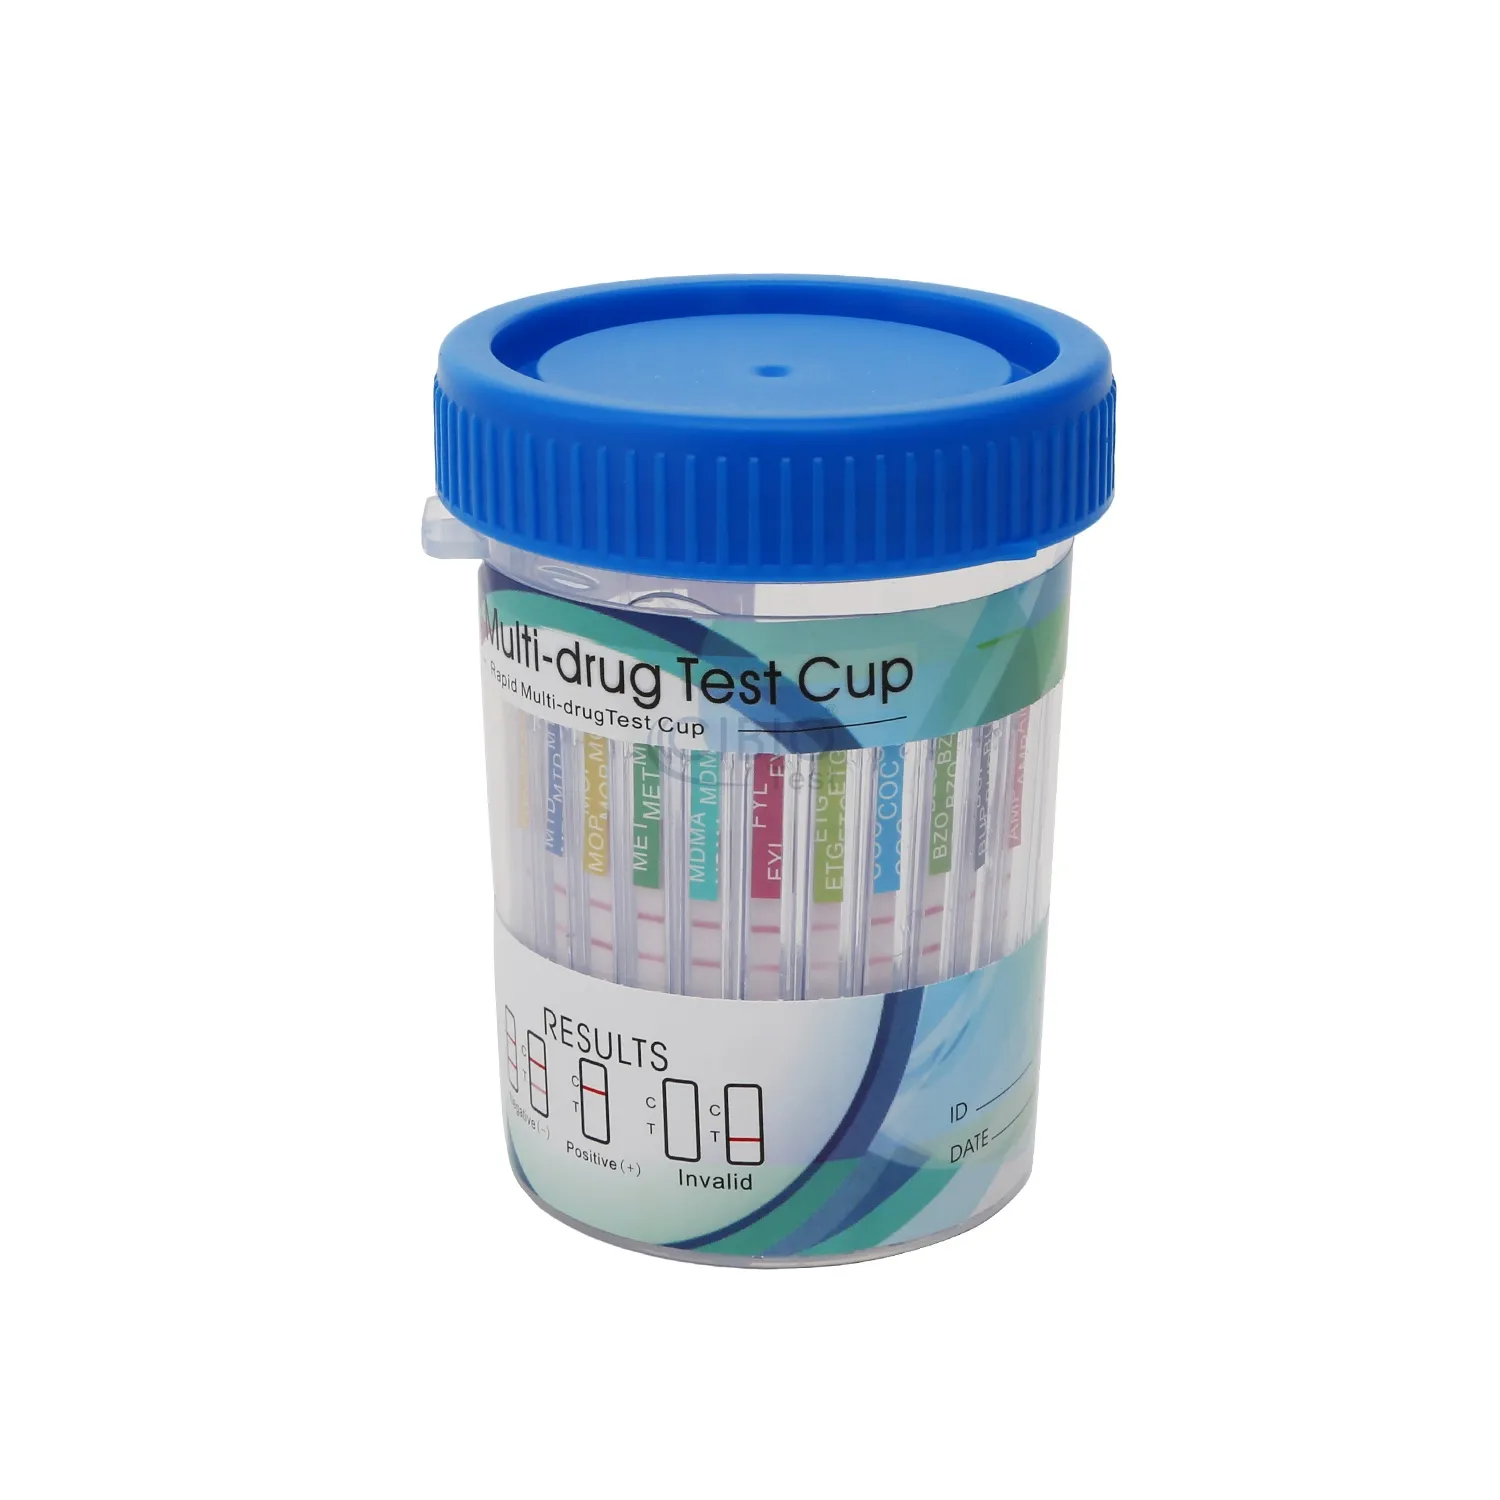 CE clia waived approved screening toxicology testing drugtest kits multi 12 Panel urine drugs test test Cup